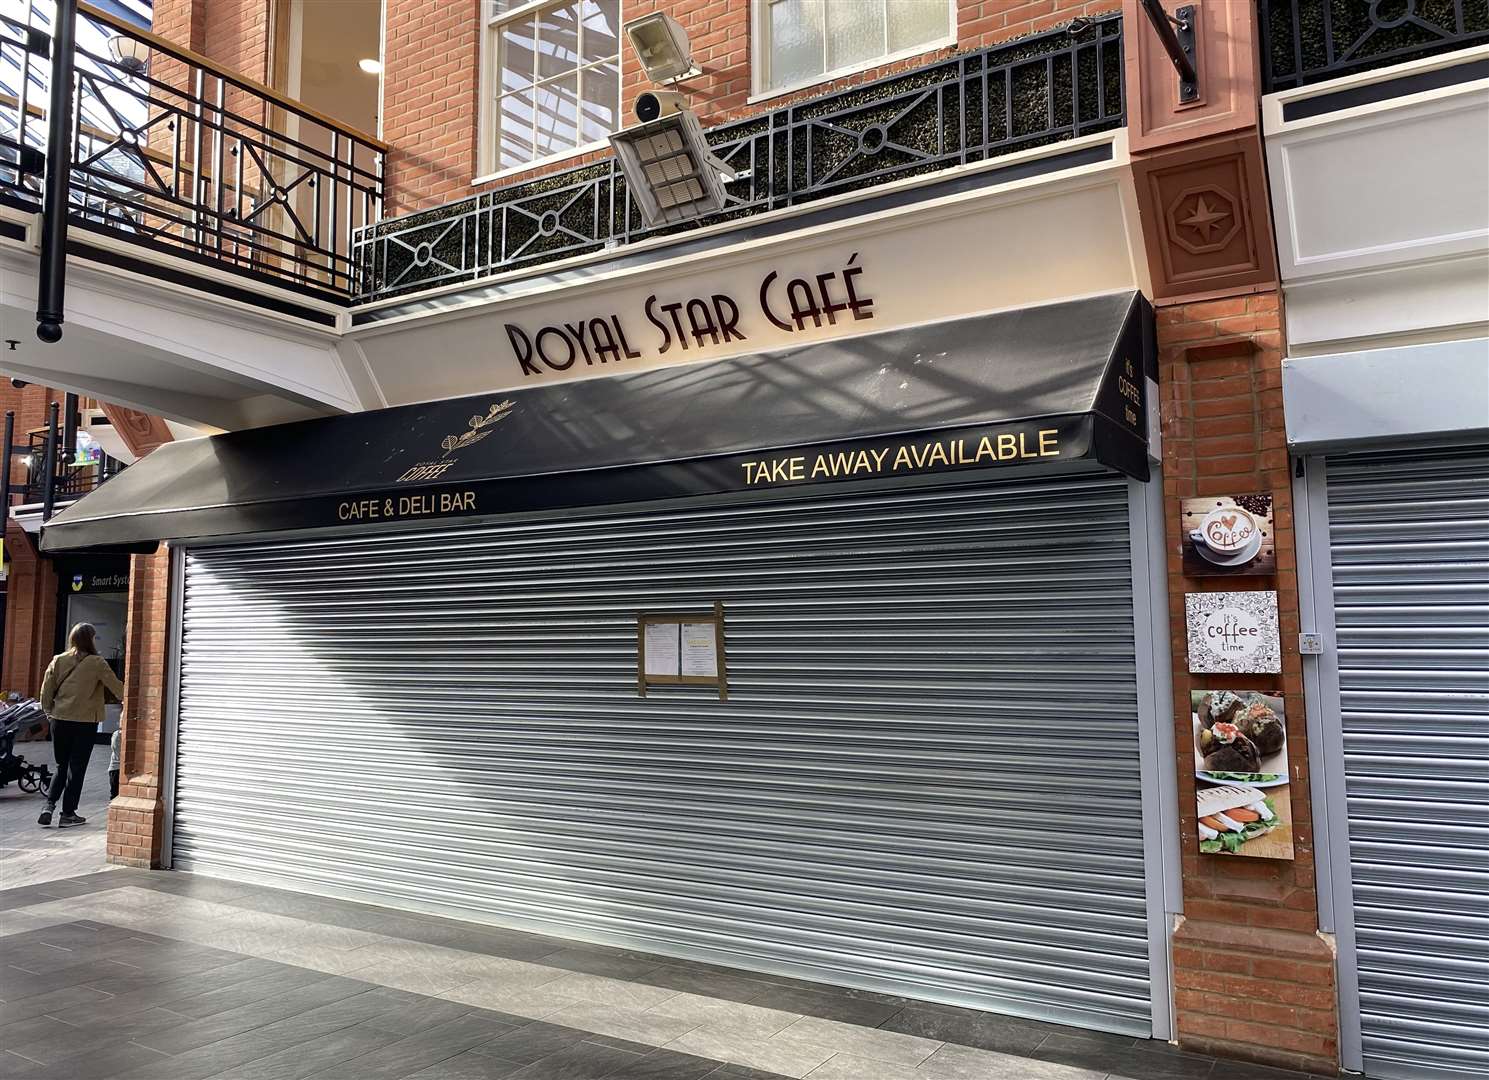 The Royal Star Cafe has closed